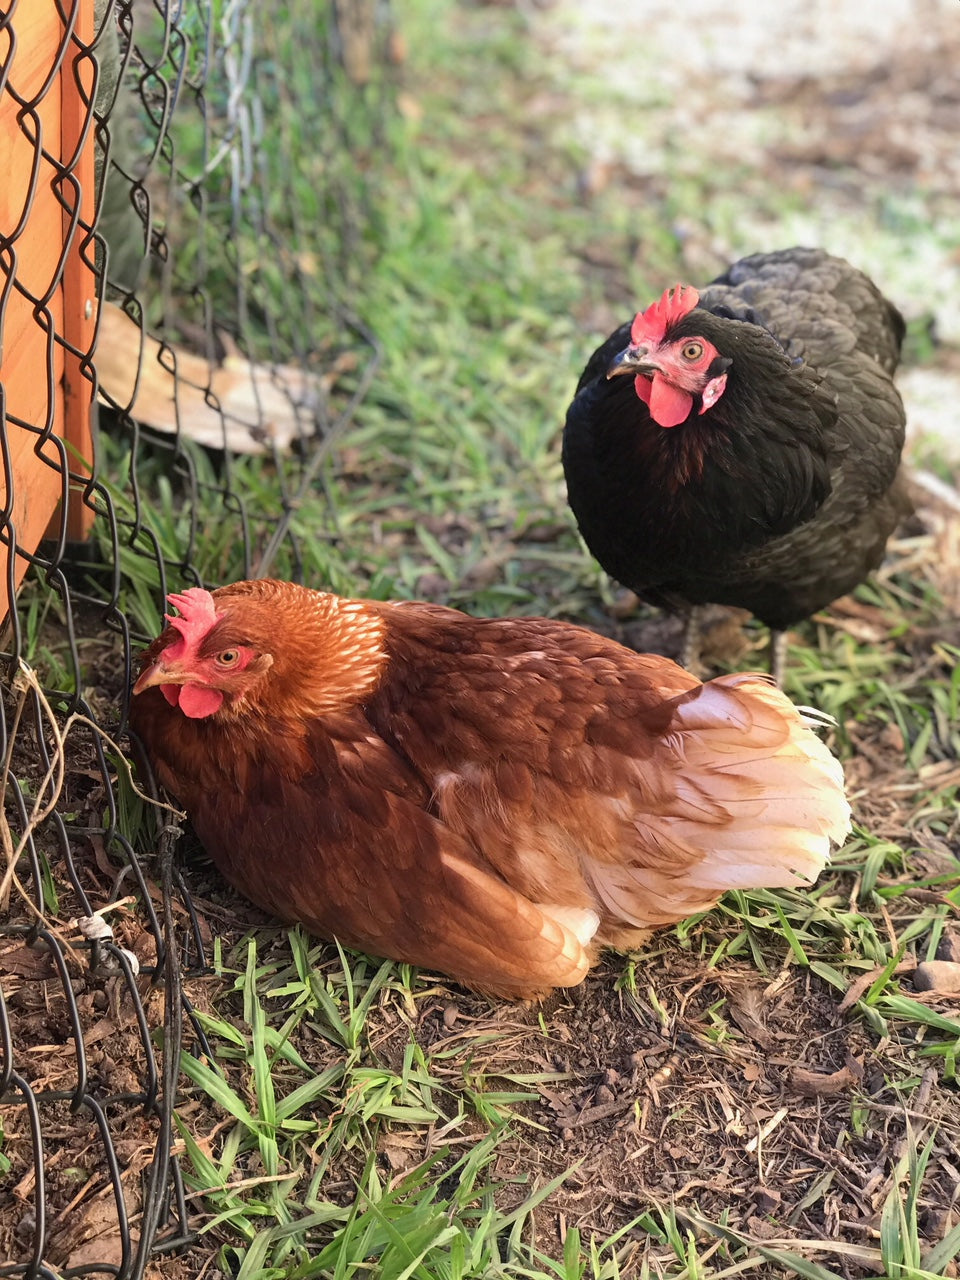 Honey & Soy - Our new hybrid Chickens